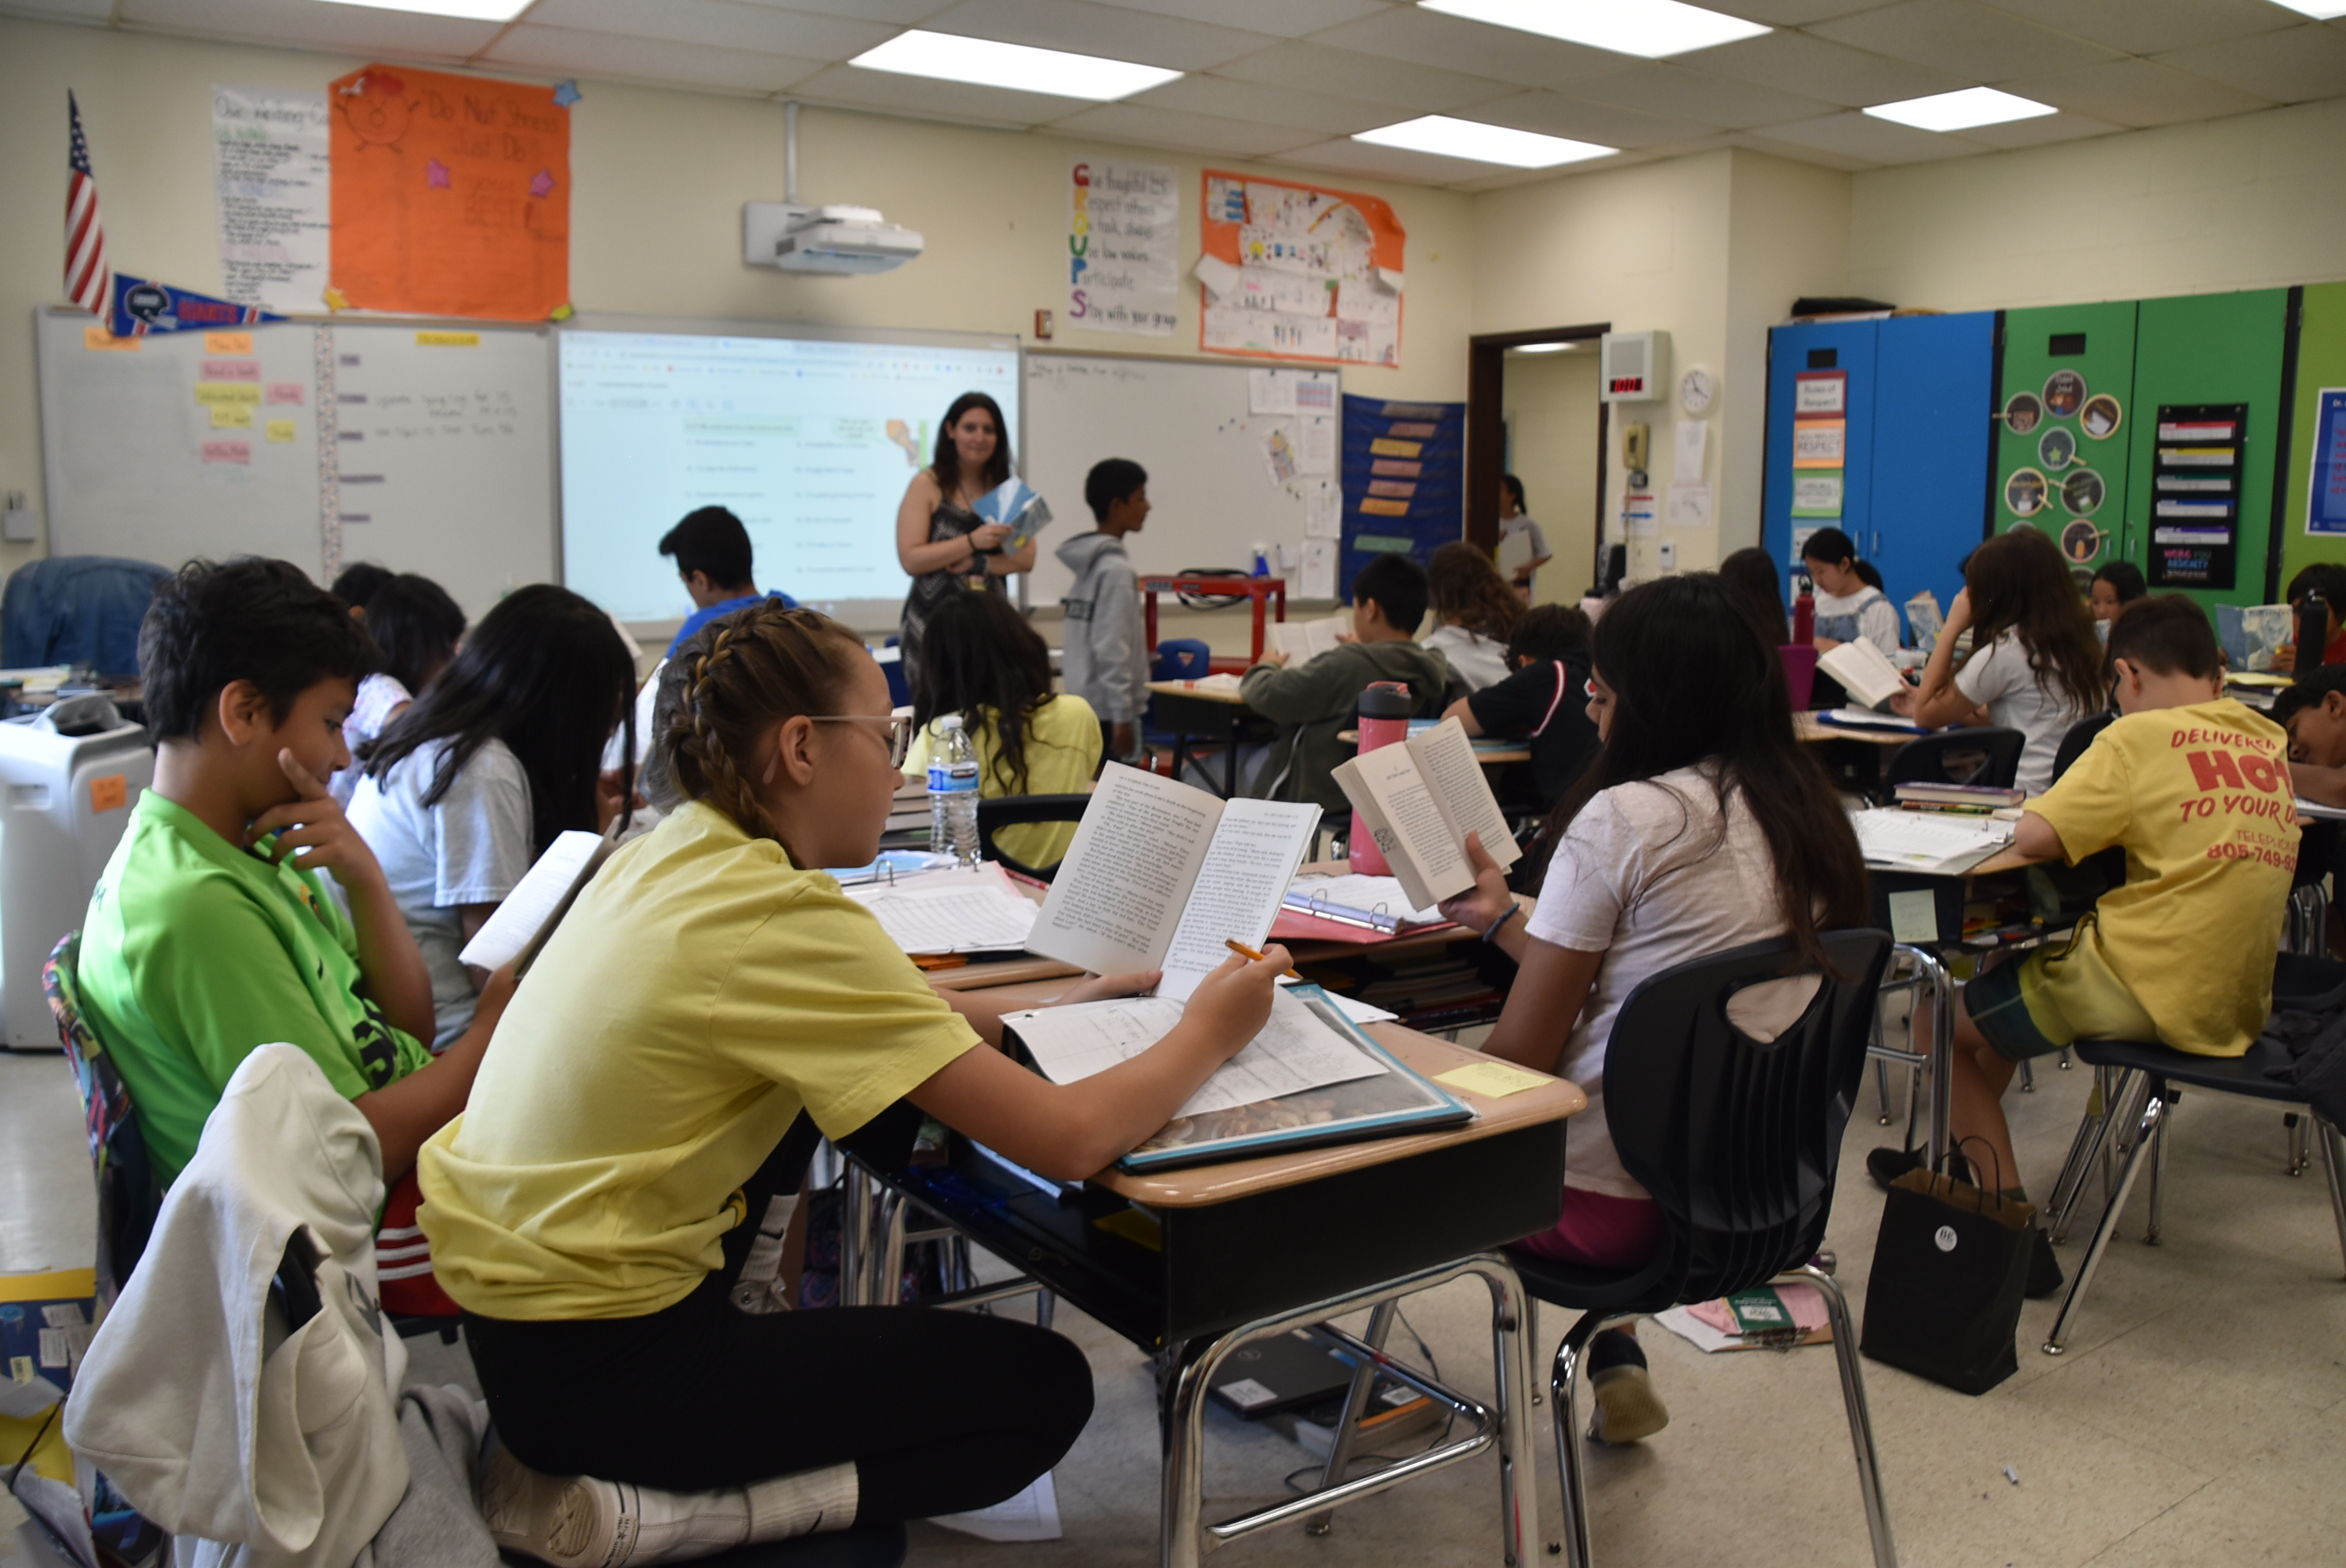 Class sizes are increasing, pushing the capacity of the district's elementary schools beyond their limit. For the 2023-2024 school year enrollment is nearly 150 students beyond capacity. That number will increase to over 400 within the next 5 years.